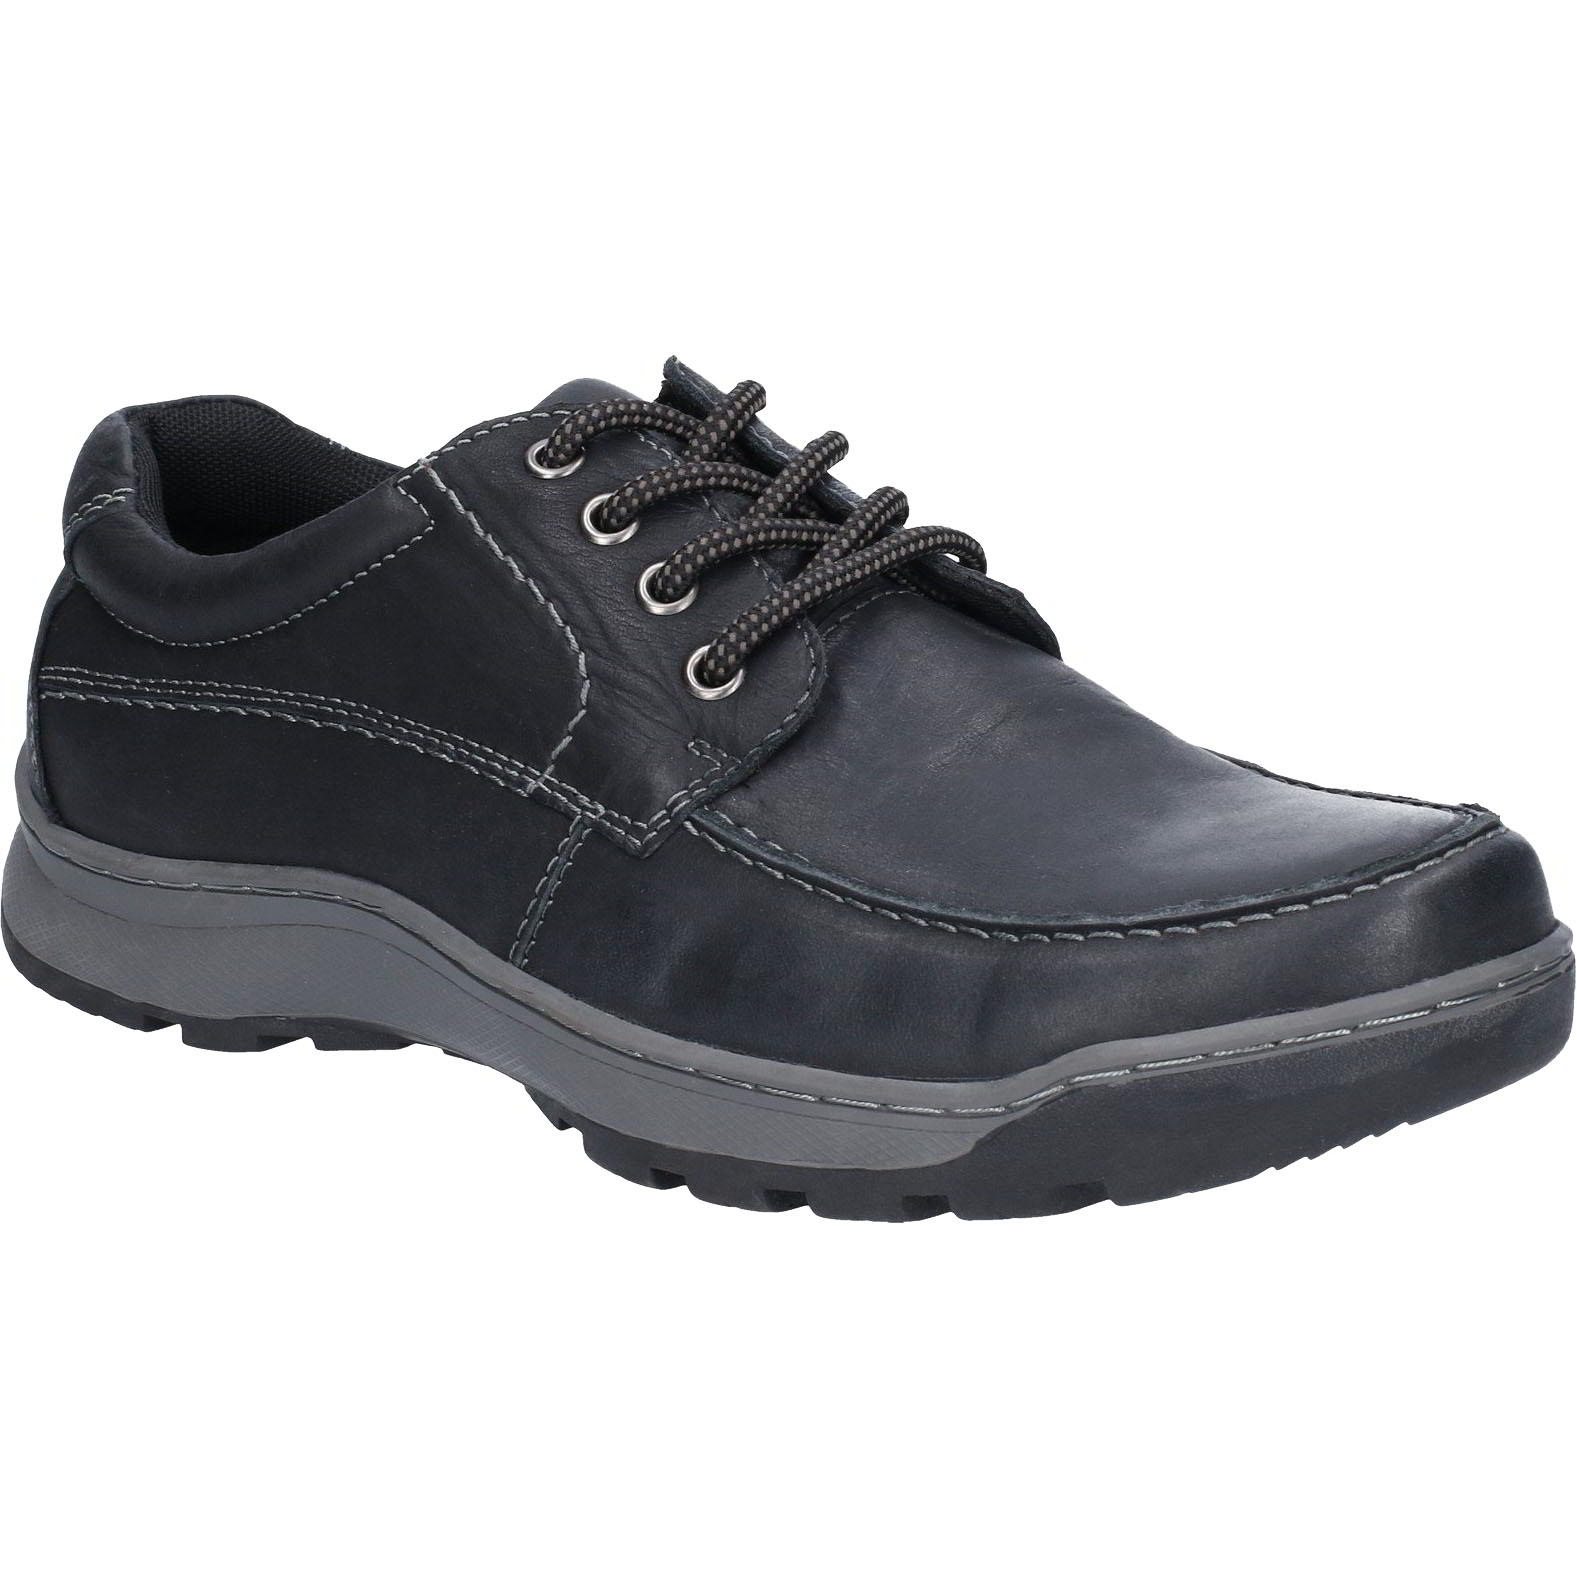 Hush Puppies Men's Tucker Leather Lace Up Shoes - Black - UK 11